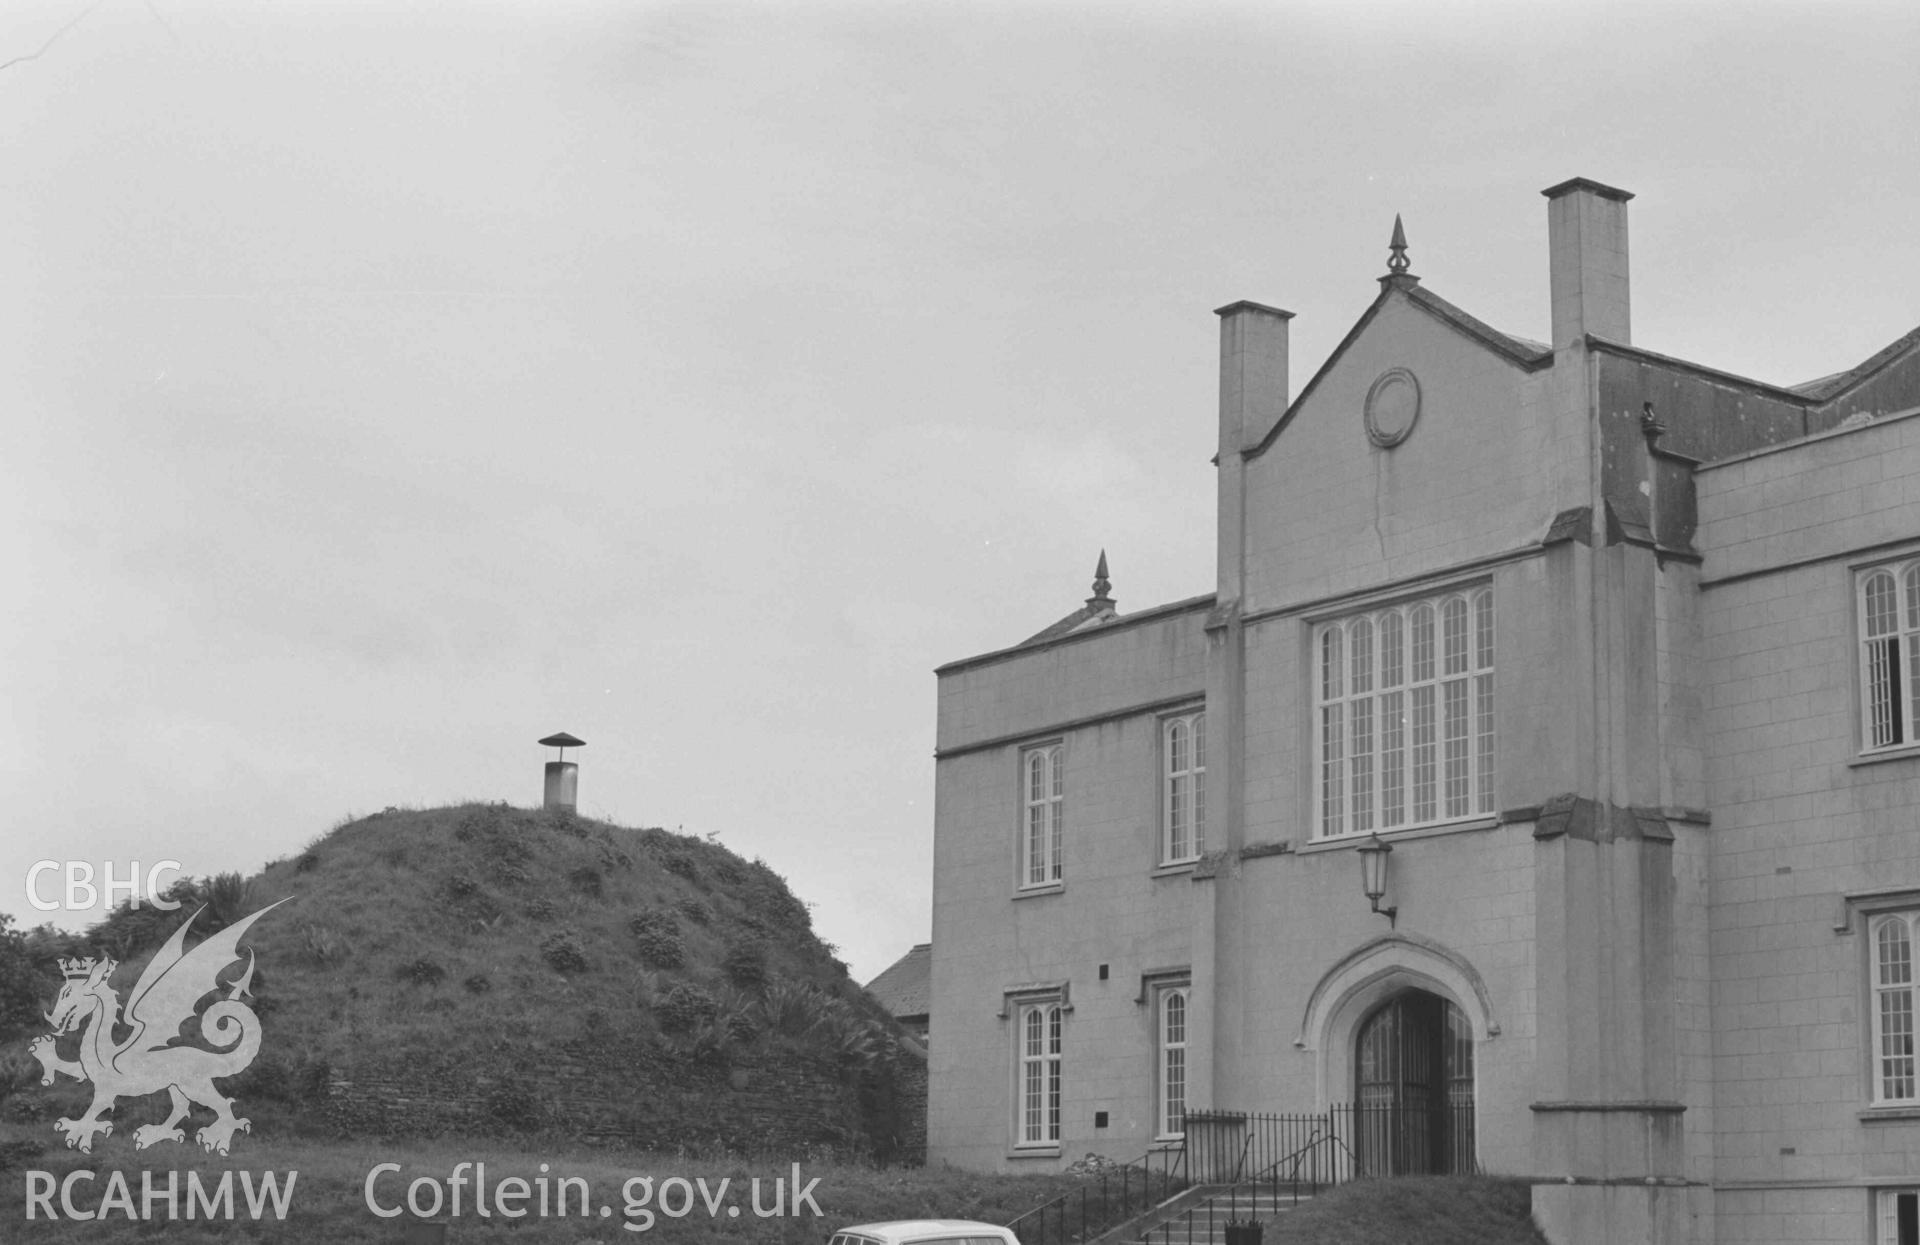 Digital copy of a black and white negative showing rear entrance to quadrangle at Lampeter College, with Norman motte on left. Photographed by Arthur Chater on 21 August 1968. Looking south east from Grid Reference SN 579 483.